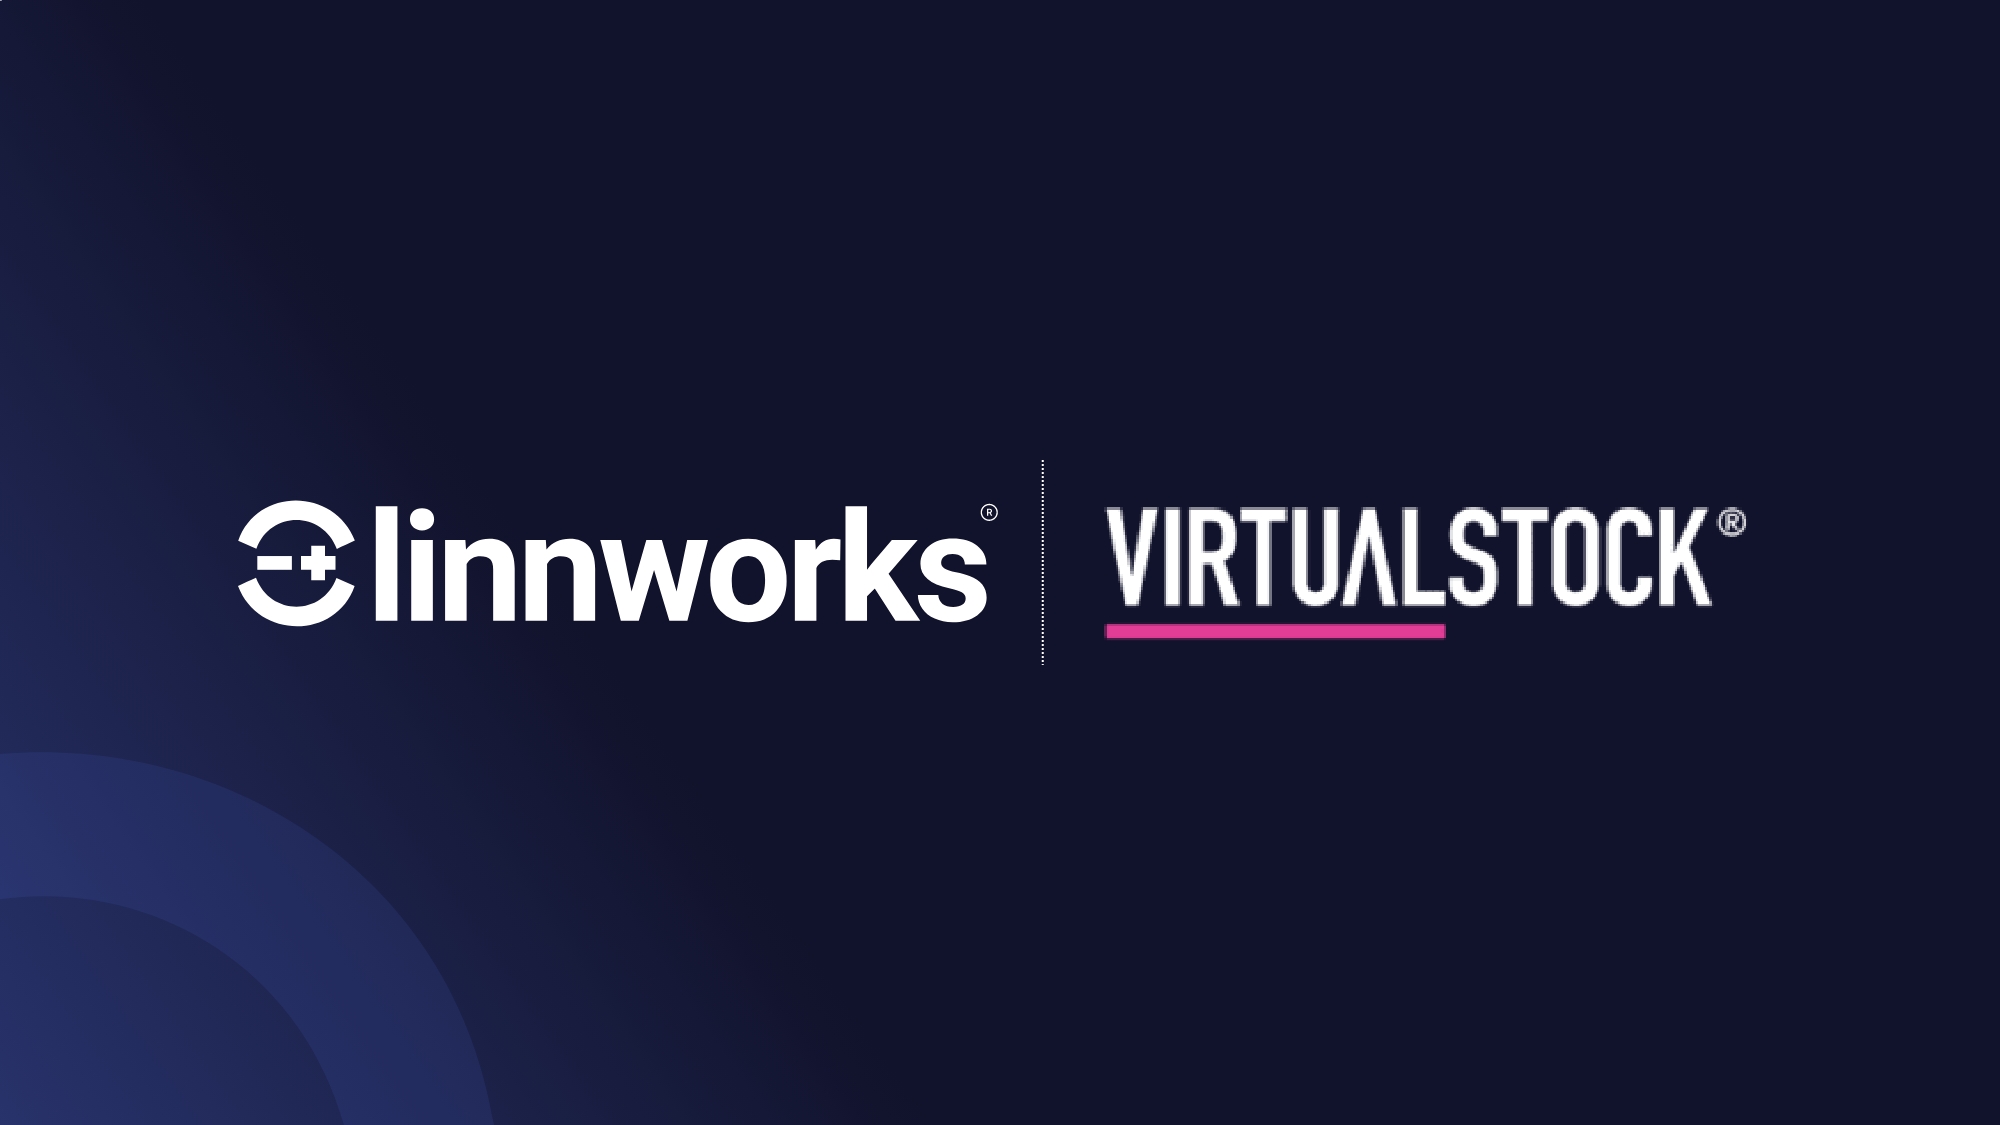 Linnworks and Virtualstock announce partnership